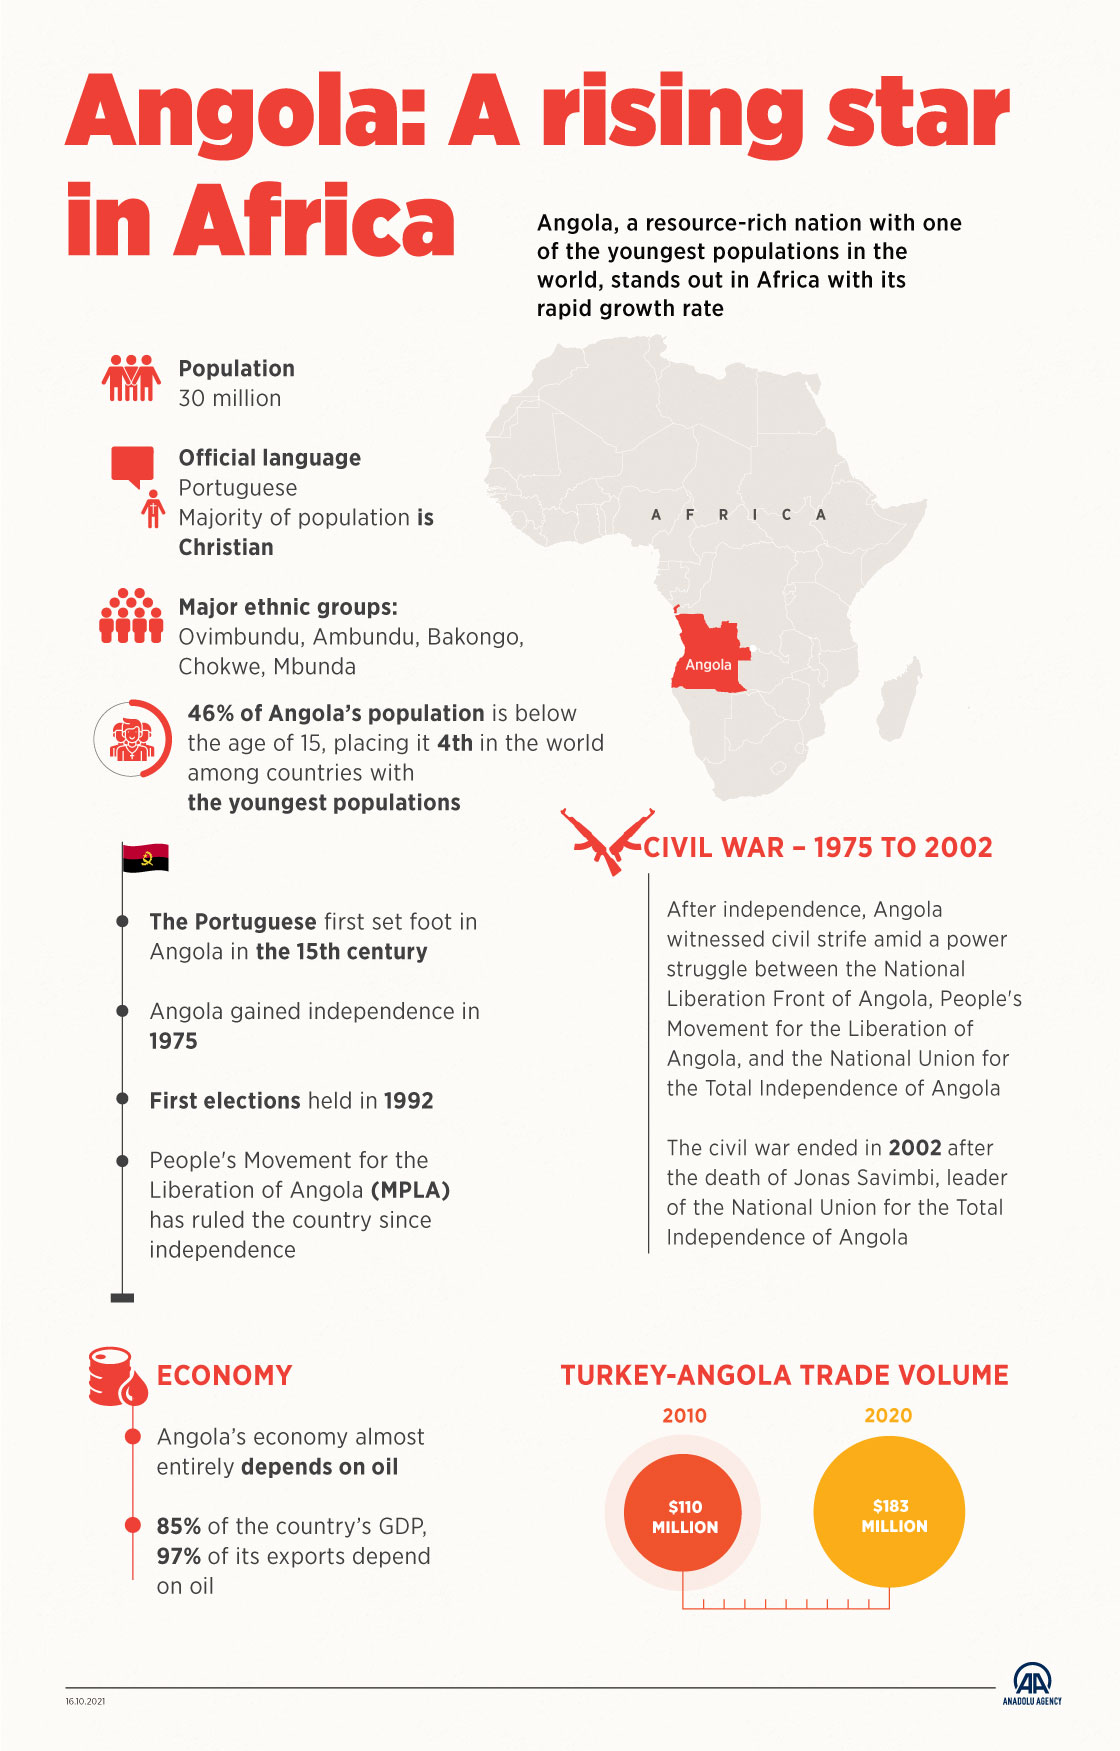 Angola: A rising star in Africa